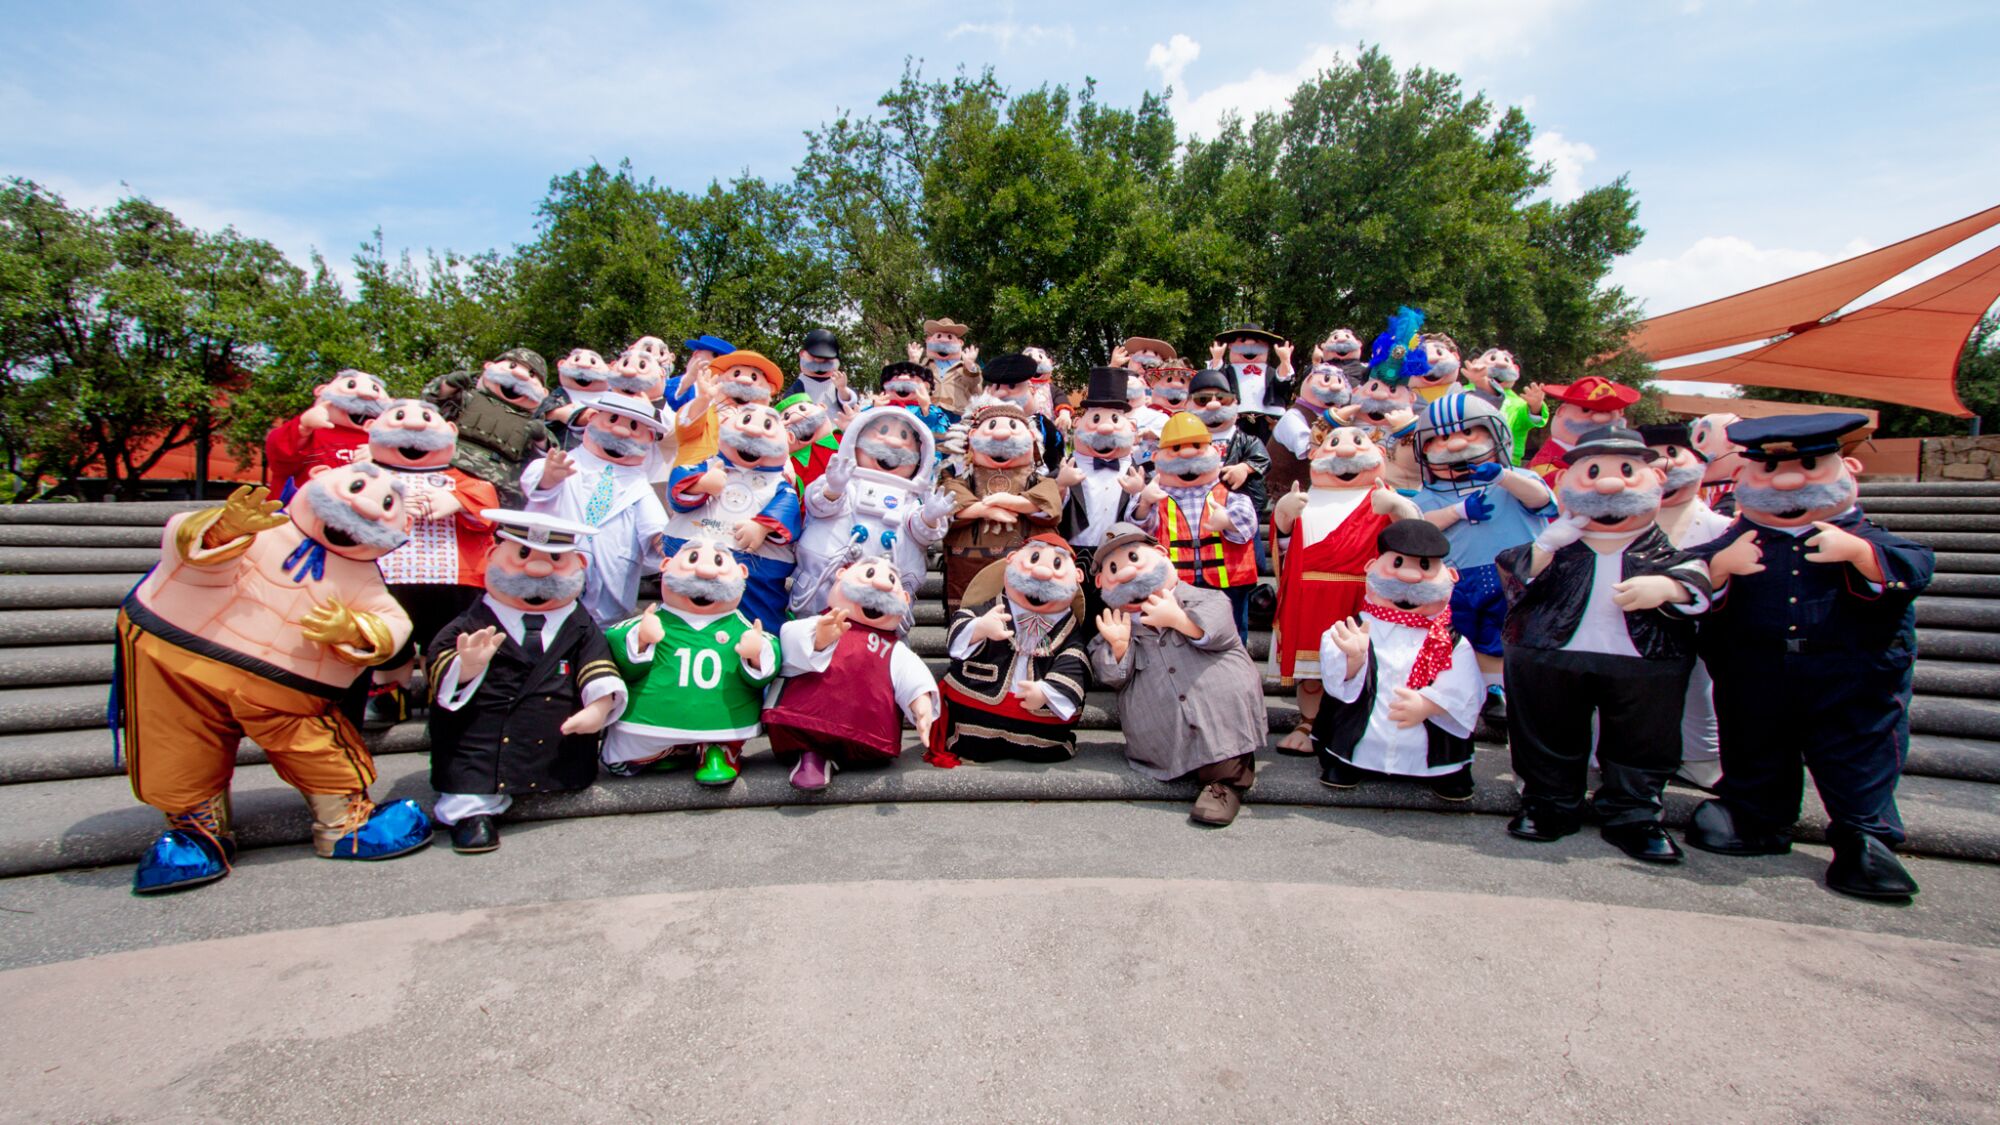 A group of people dressed as mustachioed characters in different costumes pose for a photo 